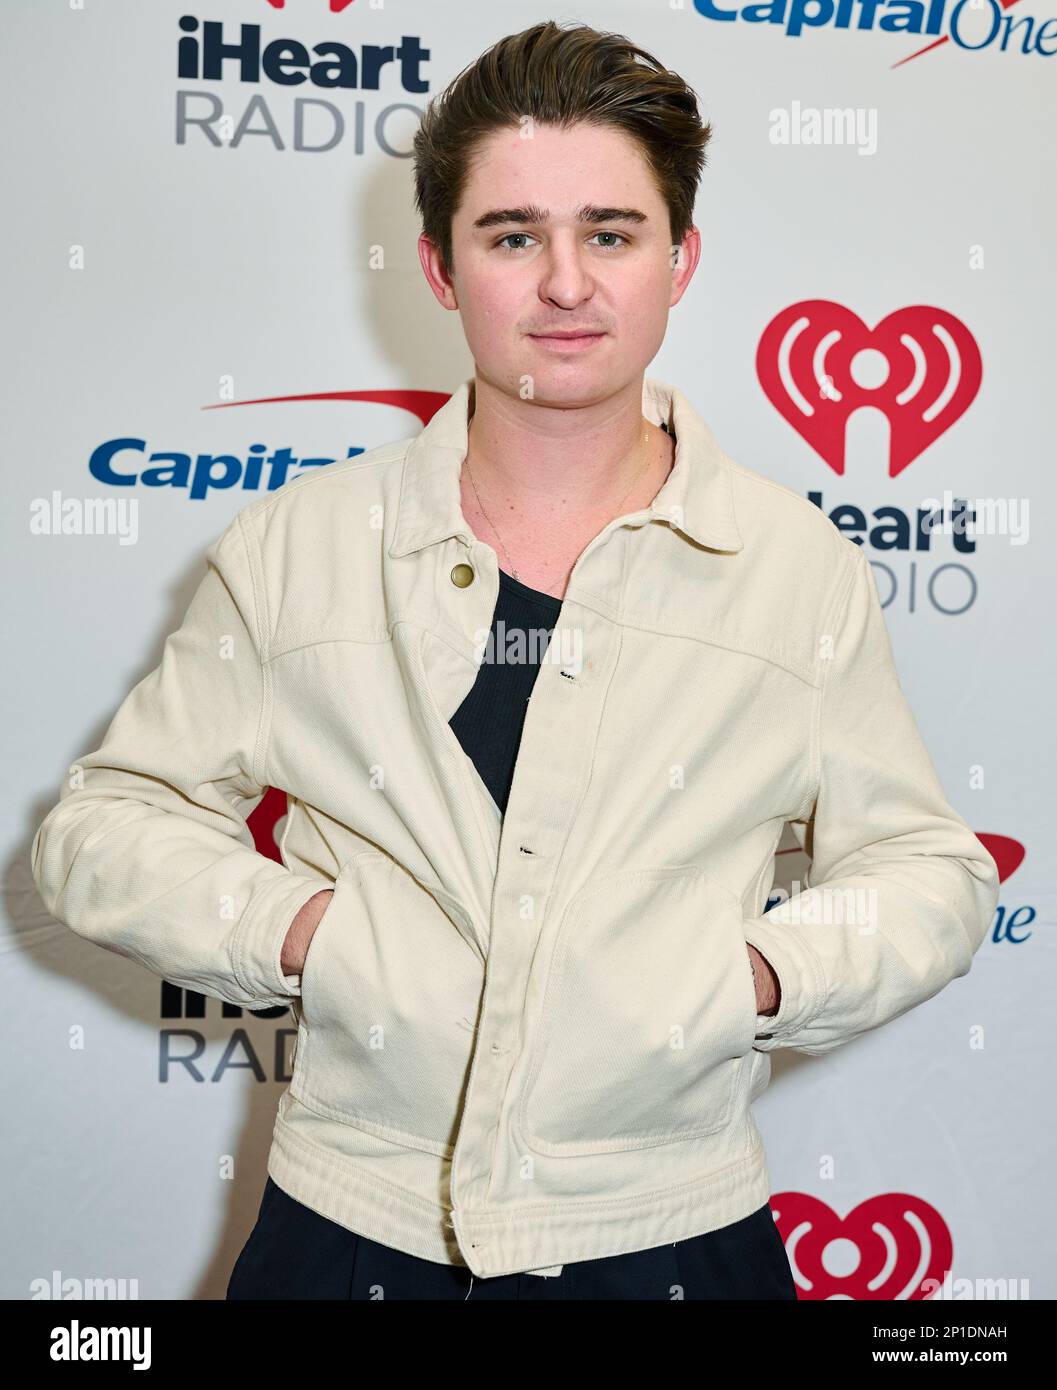 PHILADELPHIA, PA, USA - DECEMBER 12, 2022: Nicky Youre poses at Q102's iHeartRadio Jingle Ball at the Wells Fargo Center. Stock Photo